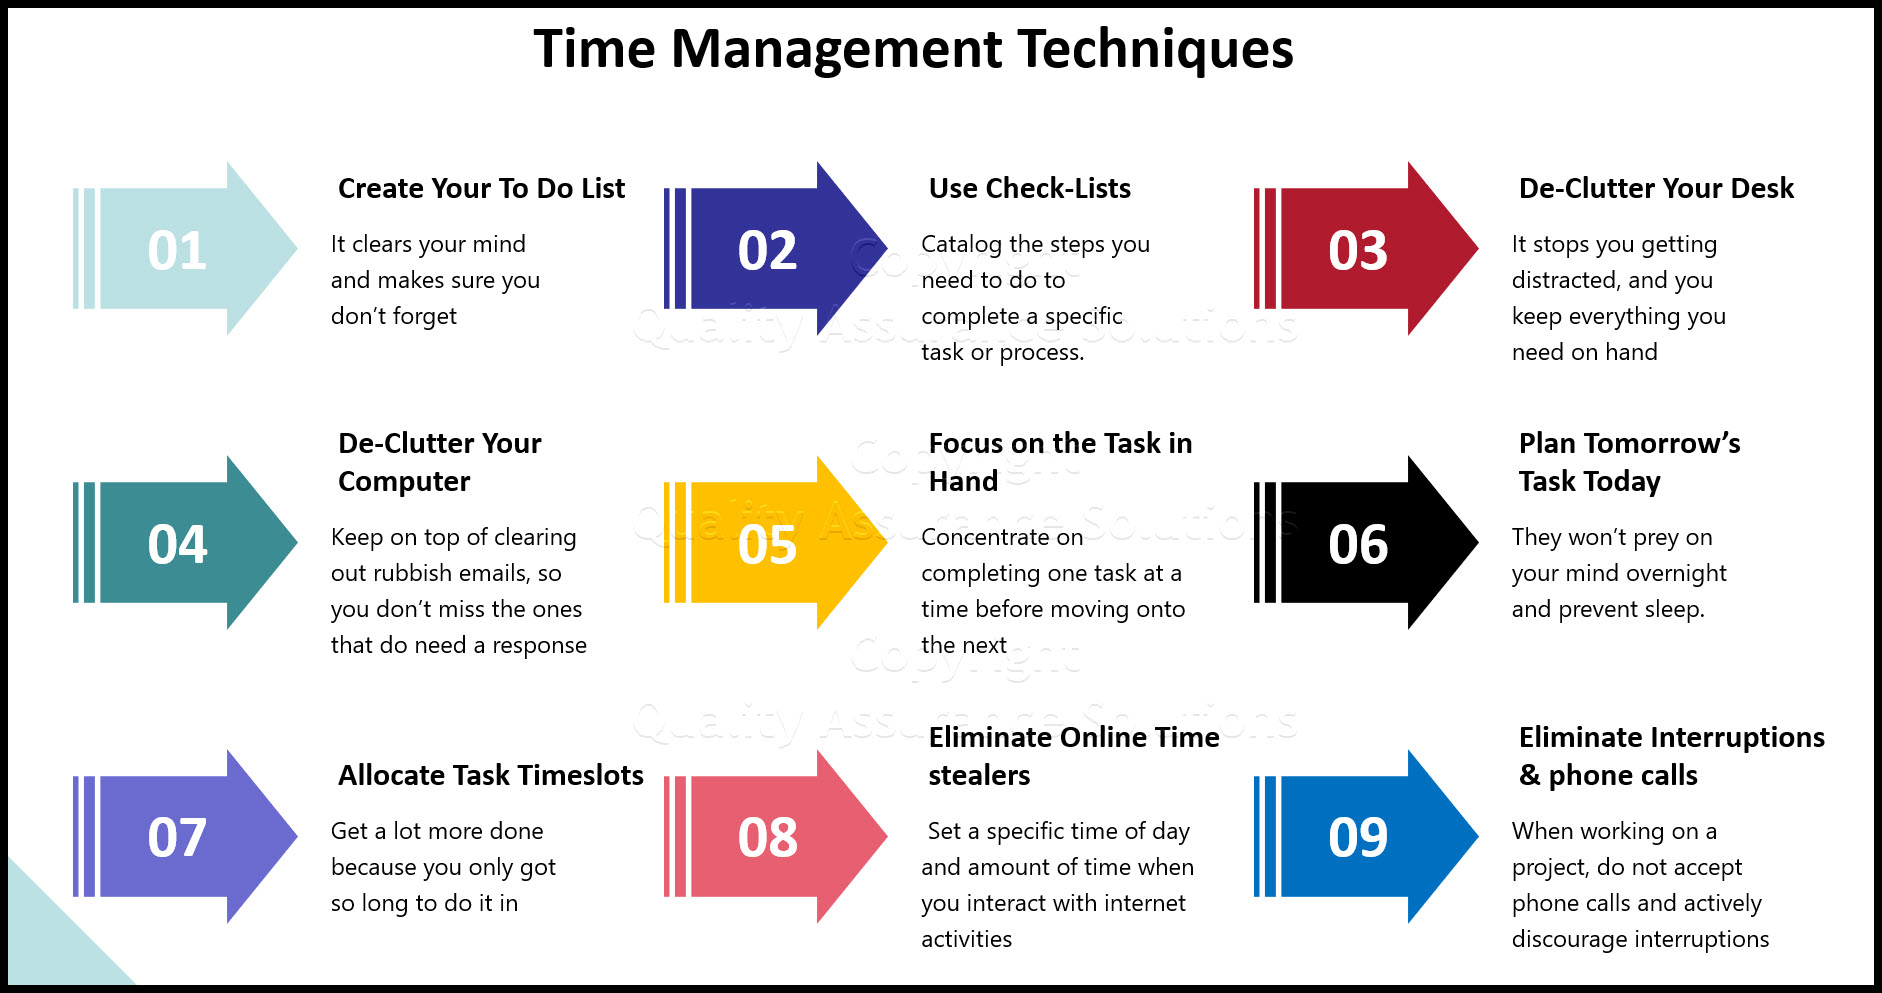 Free time management tips. Explore 10 key elements which focuses on organizing, planning, and eliminating time wasting activities.